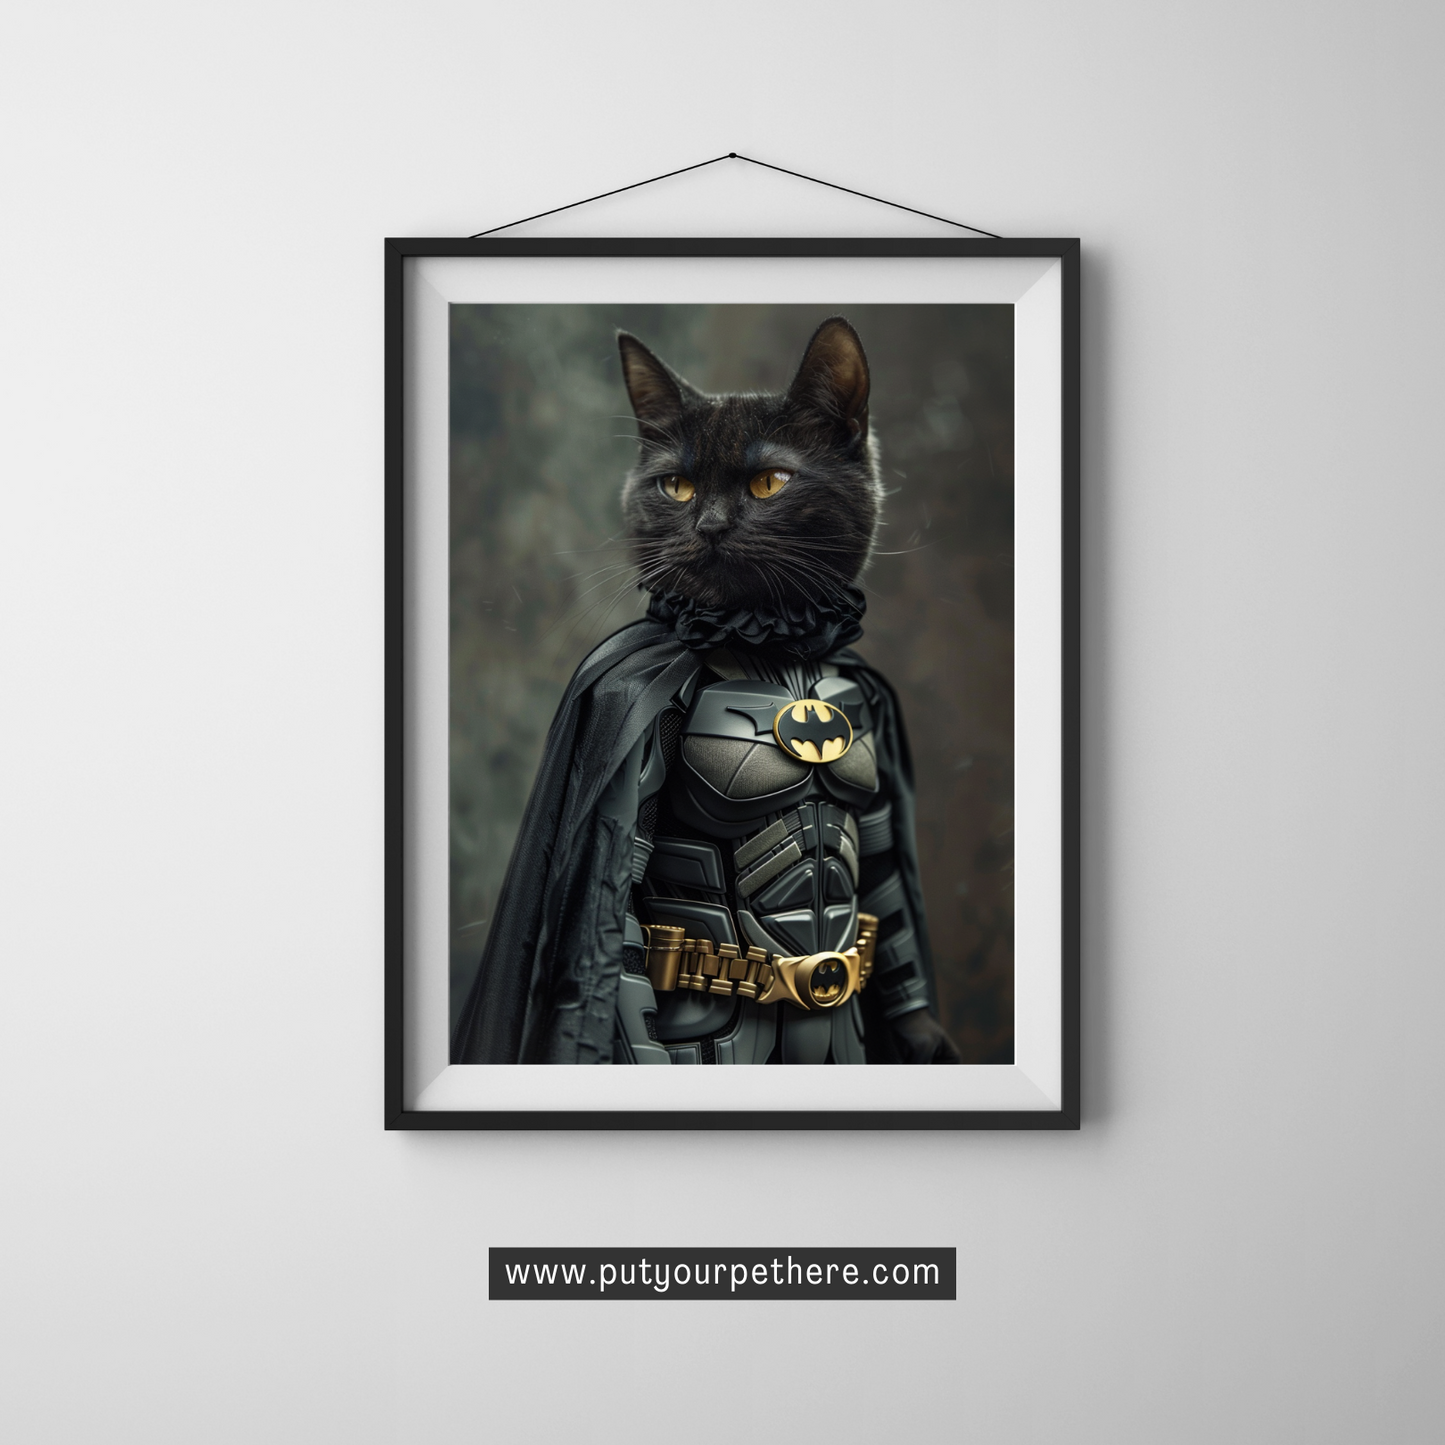 Digital art of a black cat as a Batman with a stoic gaze, dressed in a superhero costume with a cape and emblem, evoking a heroic vigilante character, against a moody backdrop, from putyourpethere.com.